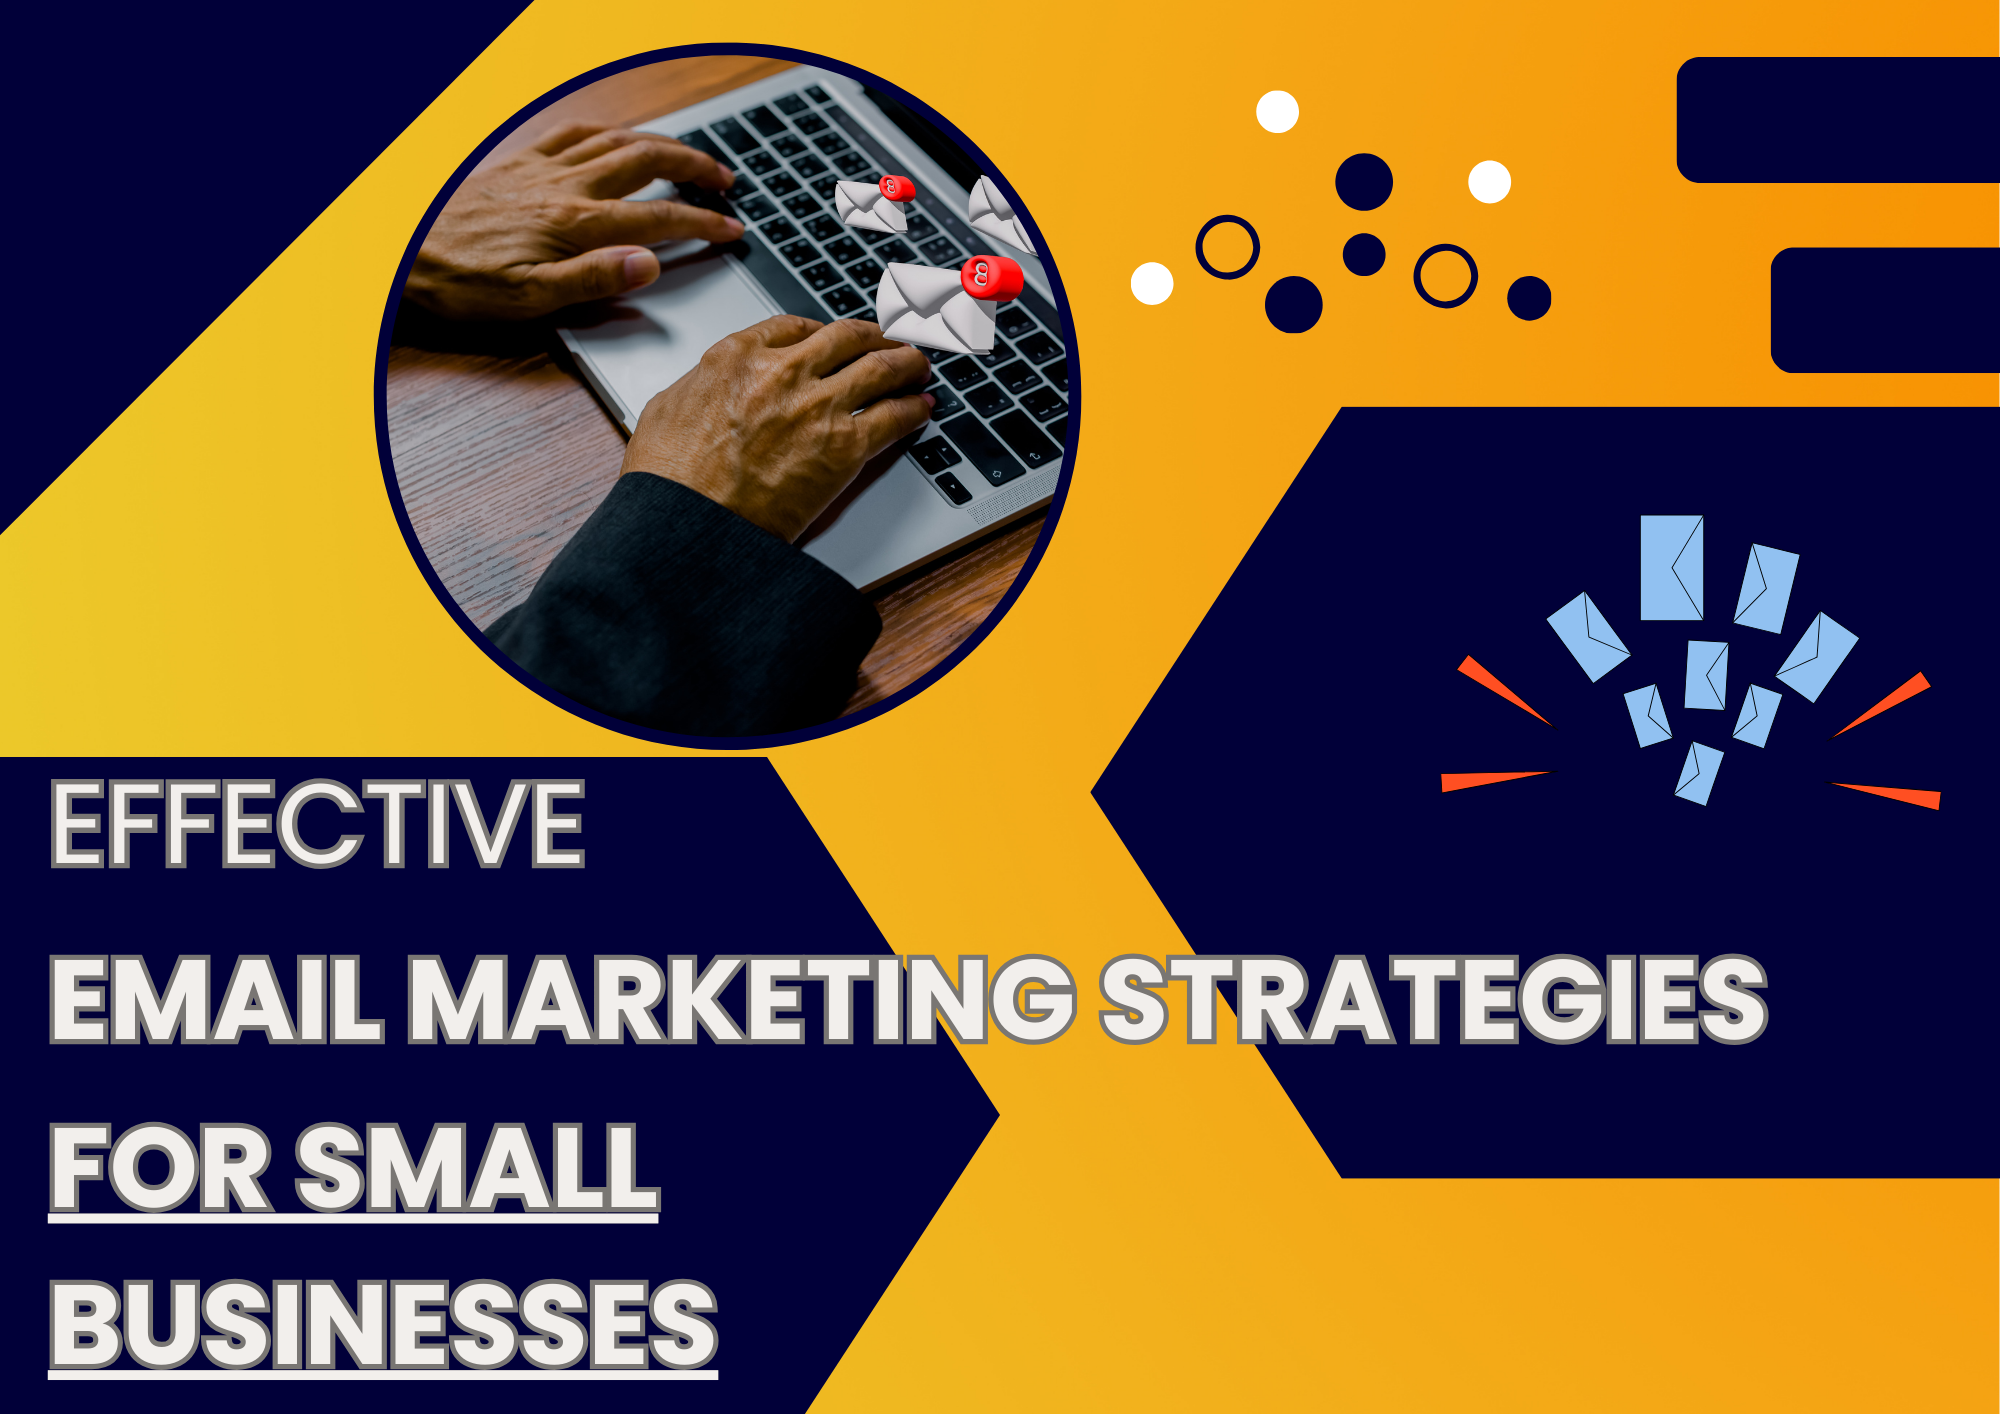 It shows effective email marketing strategies